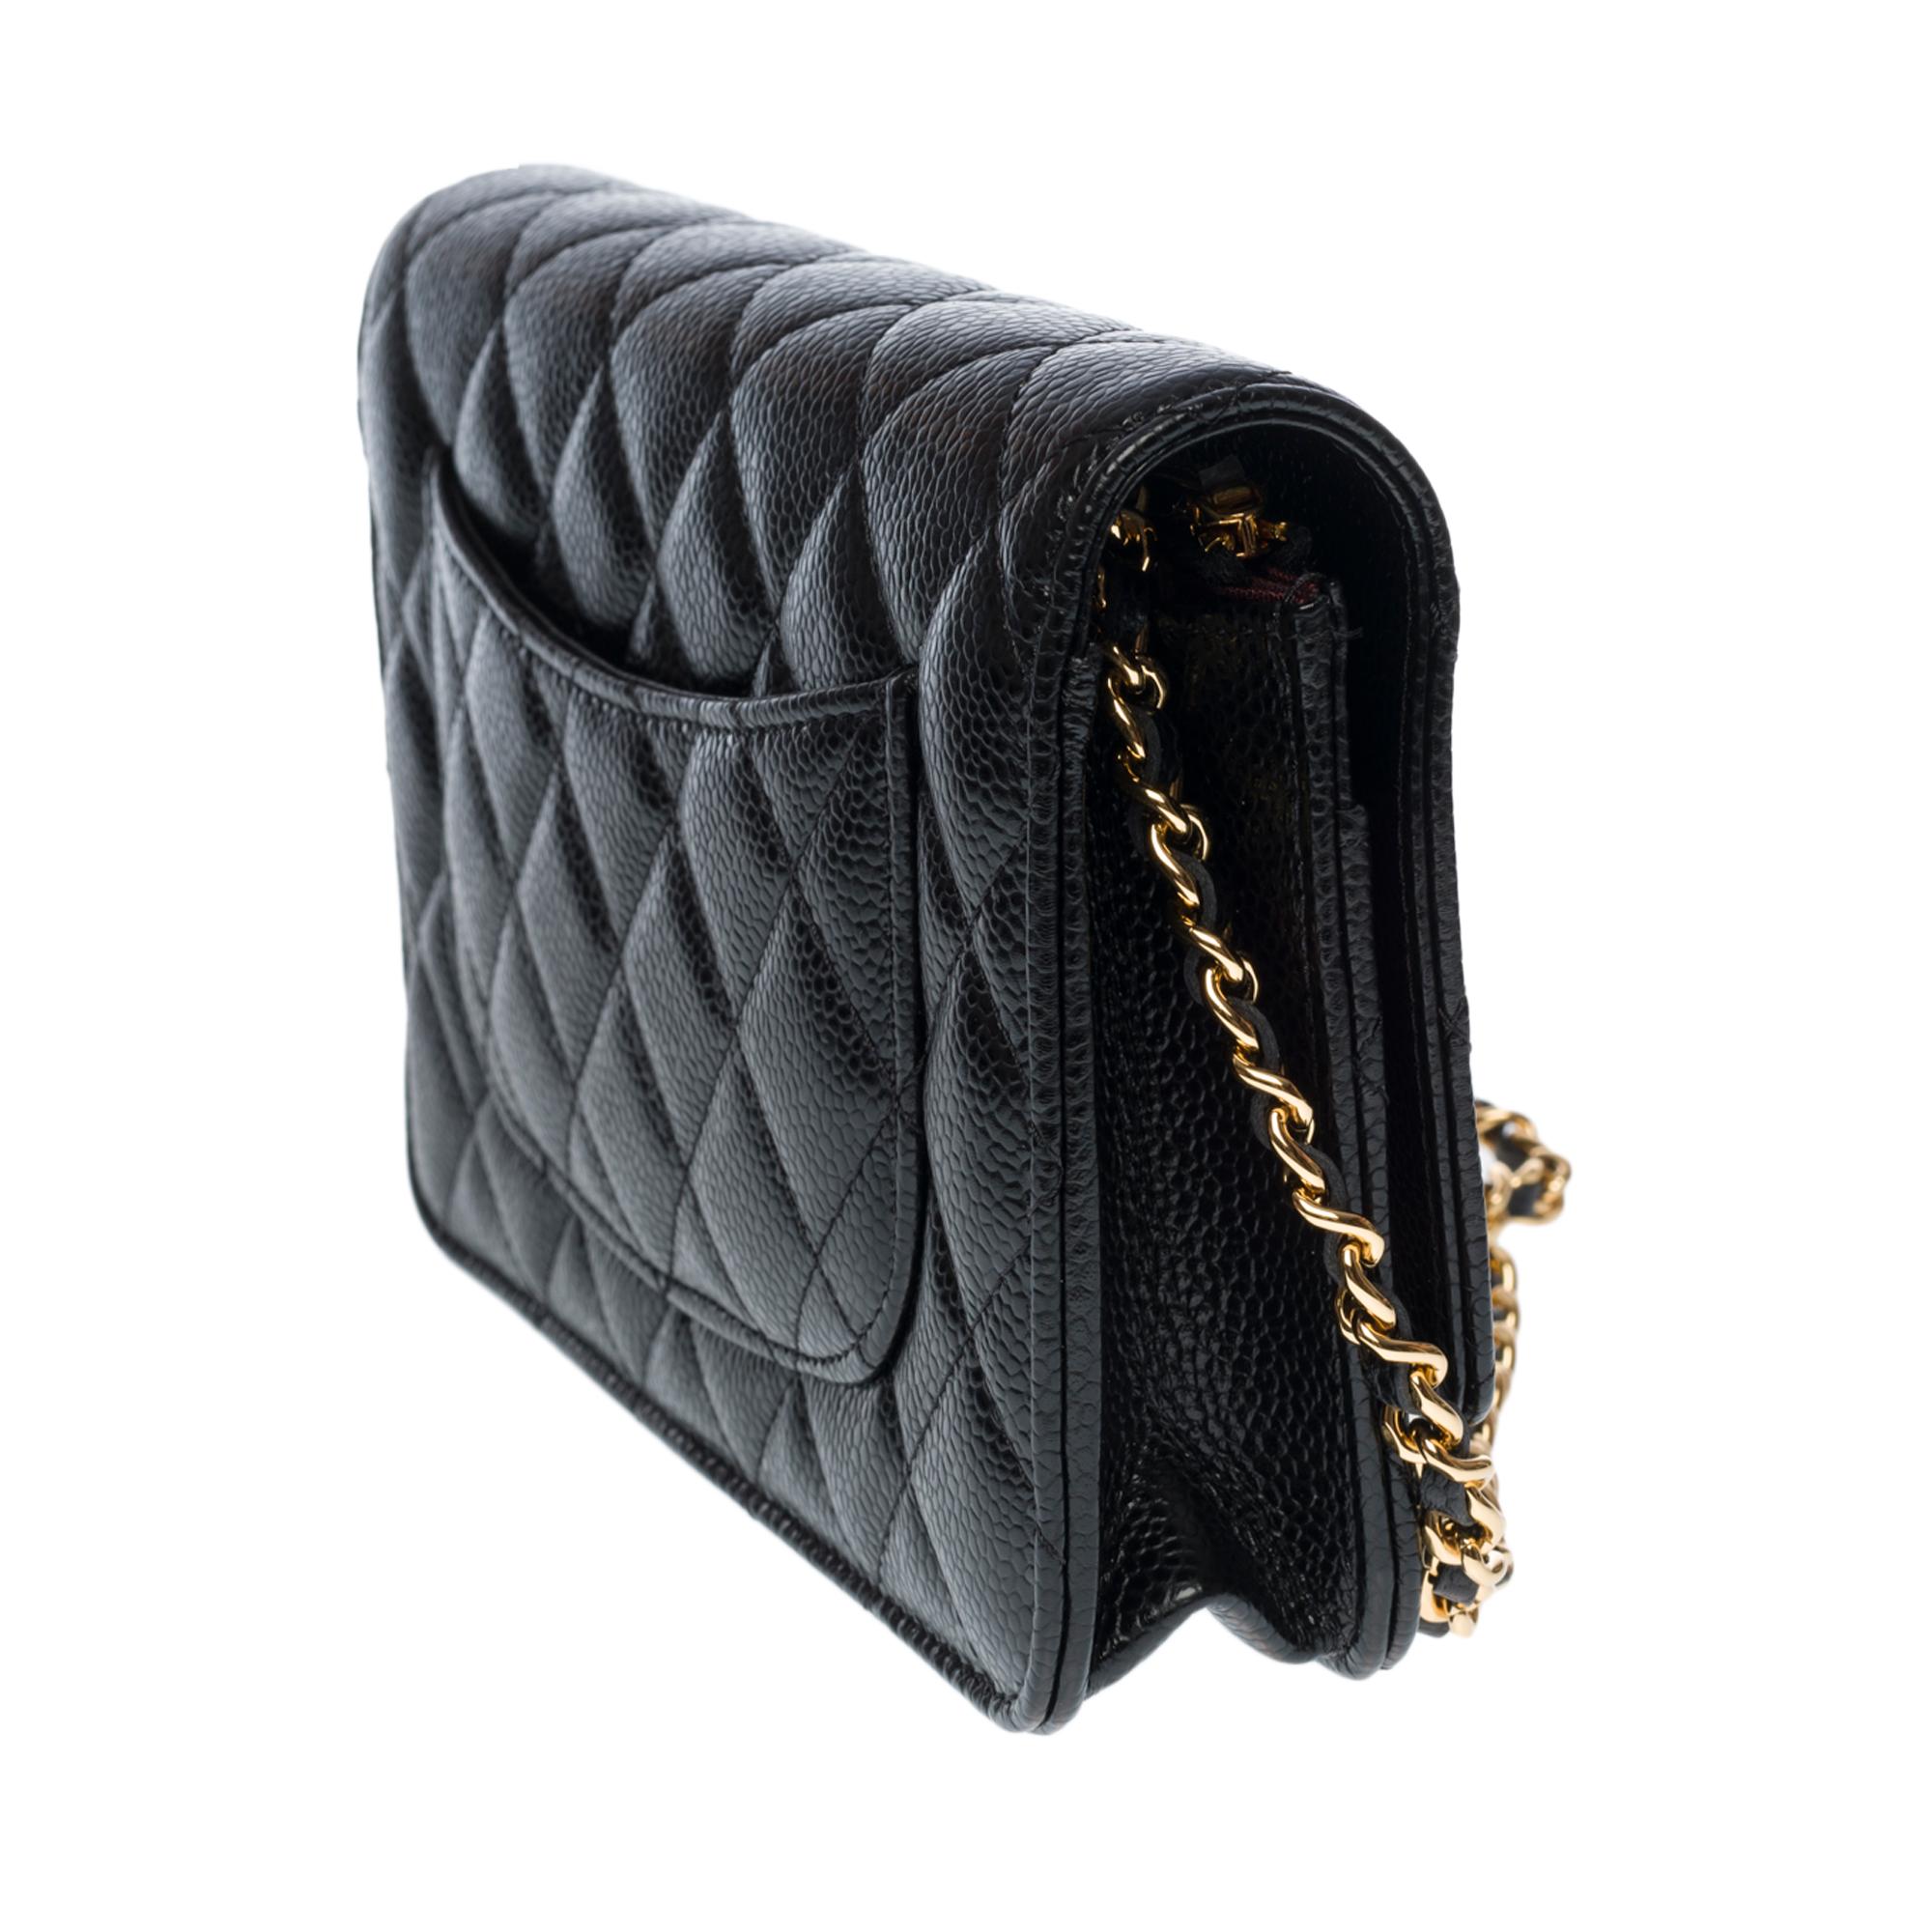 Women's Chanel Wallet on Chain (WOC)  shoulder bag in black Caviar quilted leather, GHW